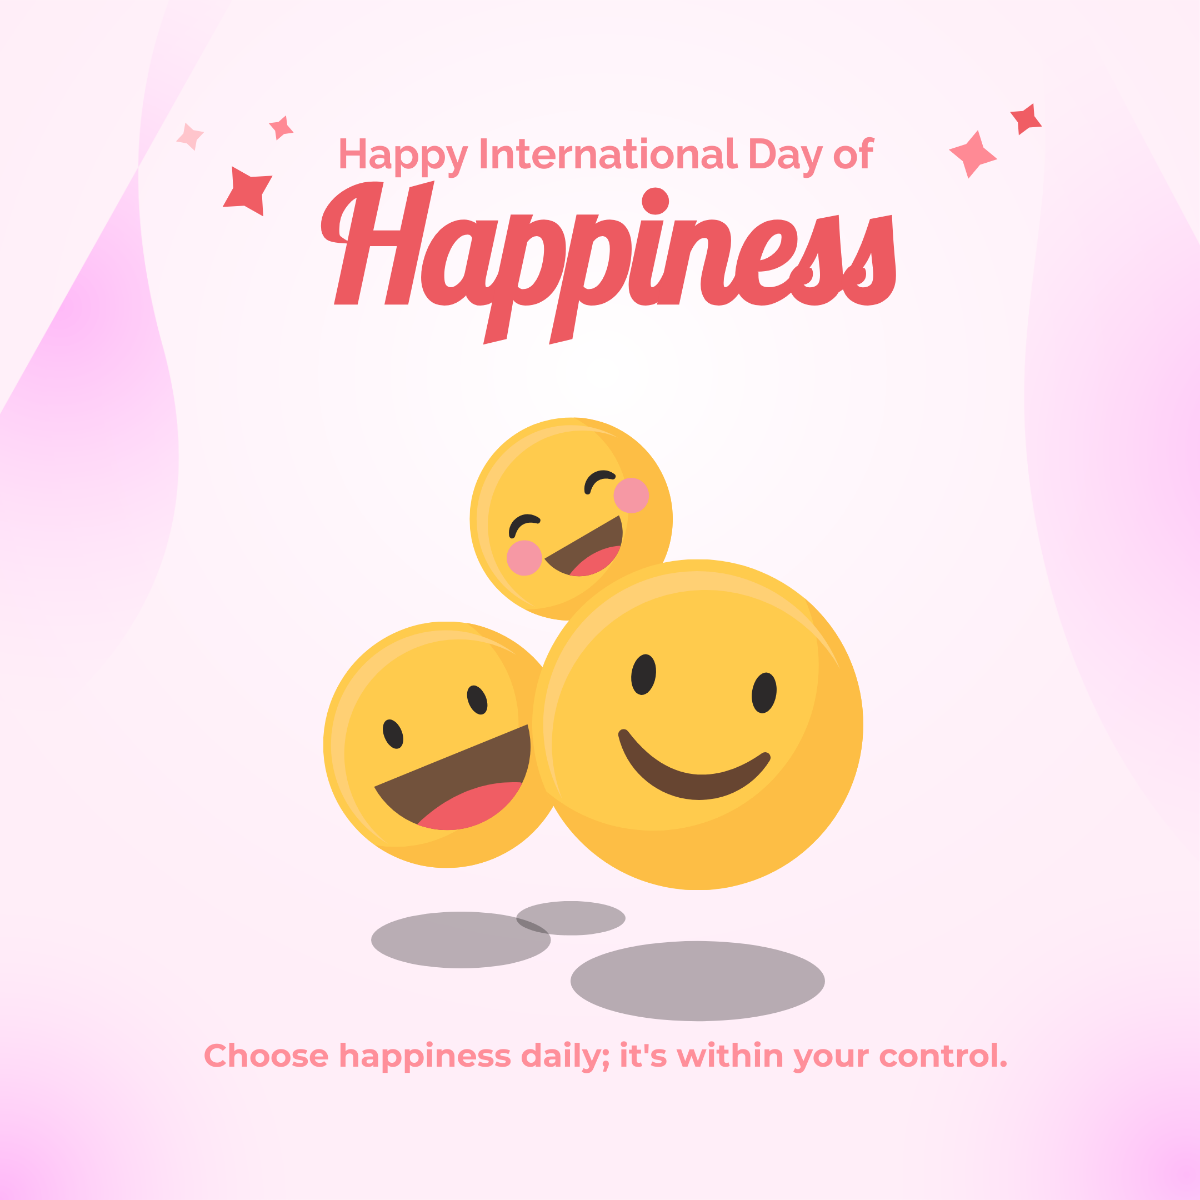  International Day of Happiness Facebook Post Template